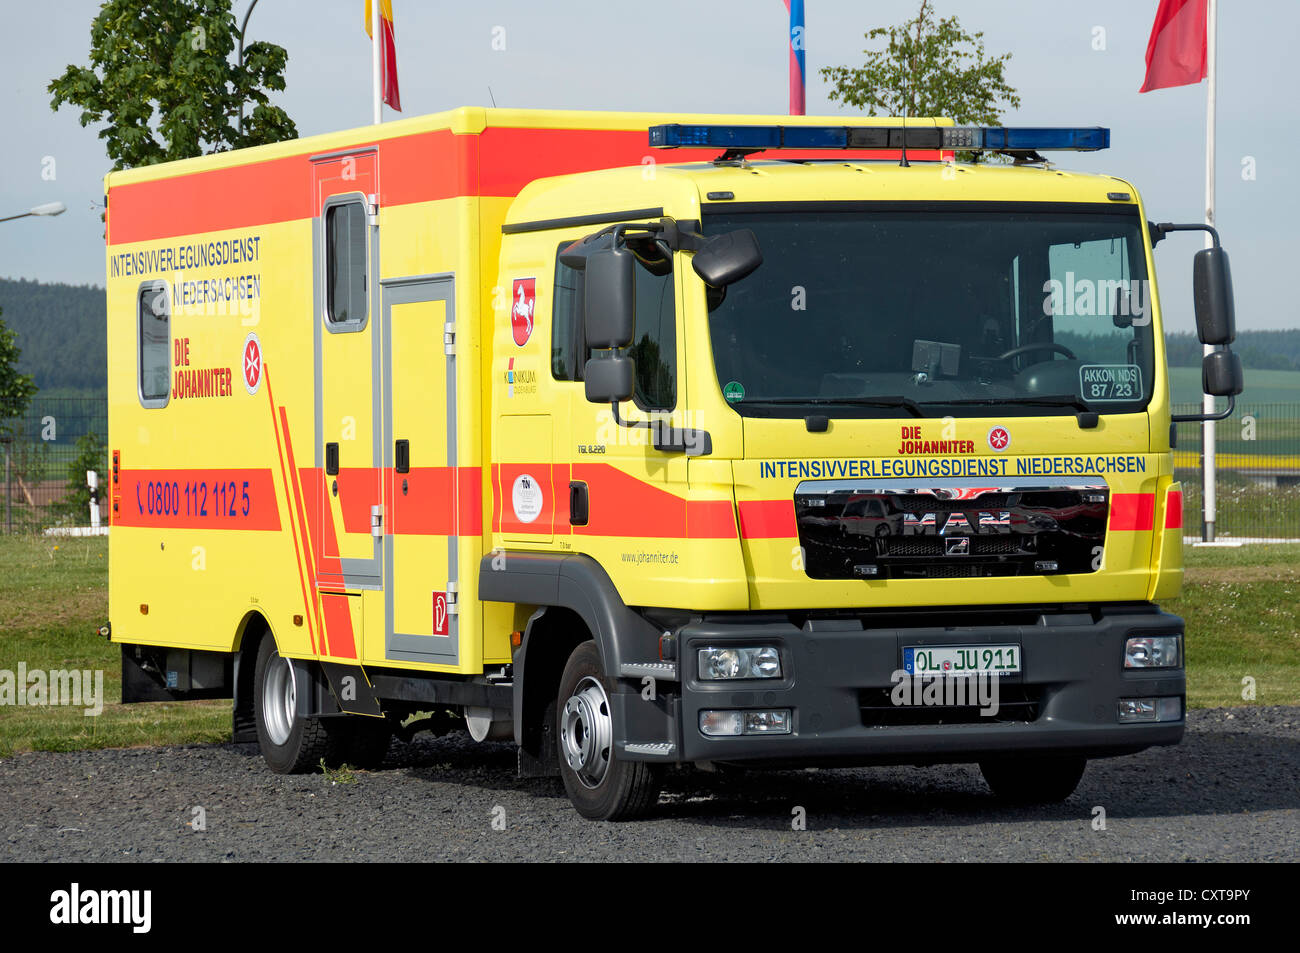 MAN truck, a St. John emergency vehicle, intensive care relocation service of Lower Saxony, RETTmobil, trade fair in Fulda Stock Photo